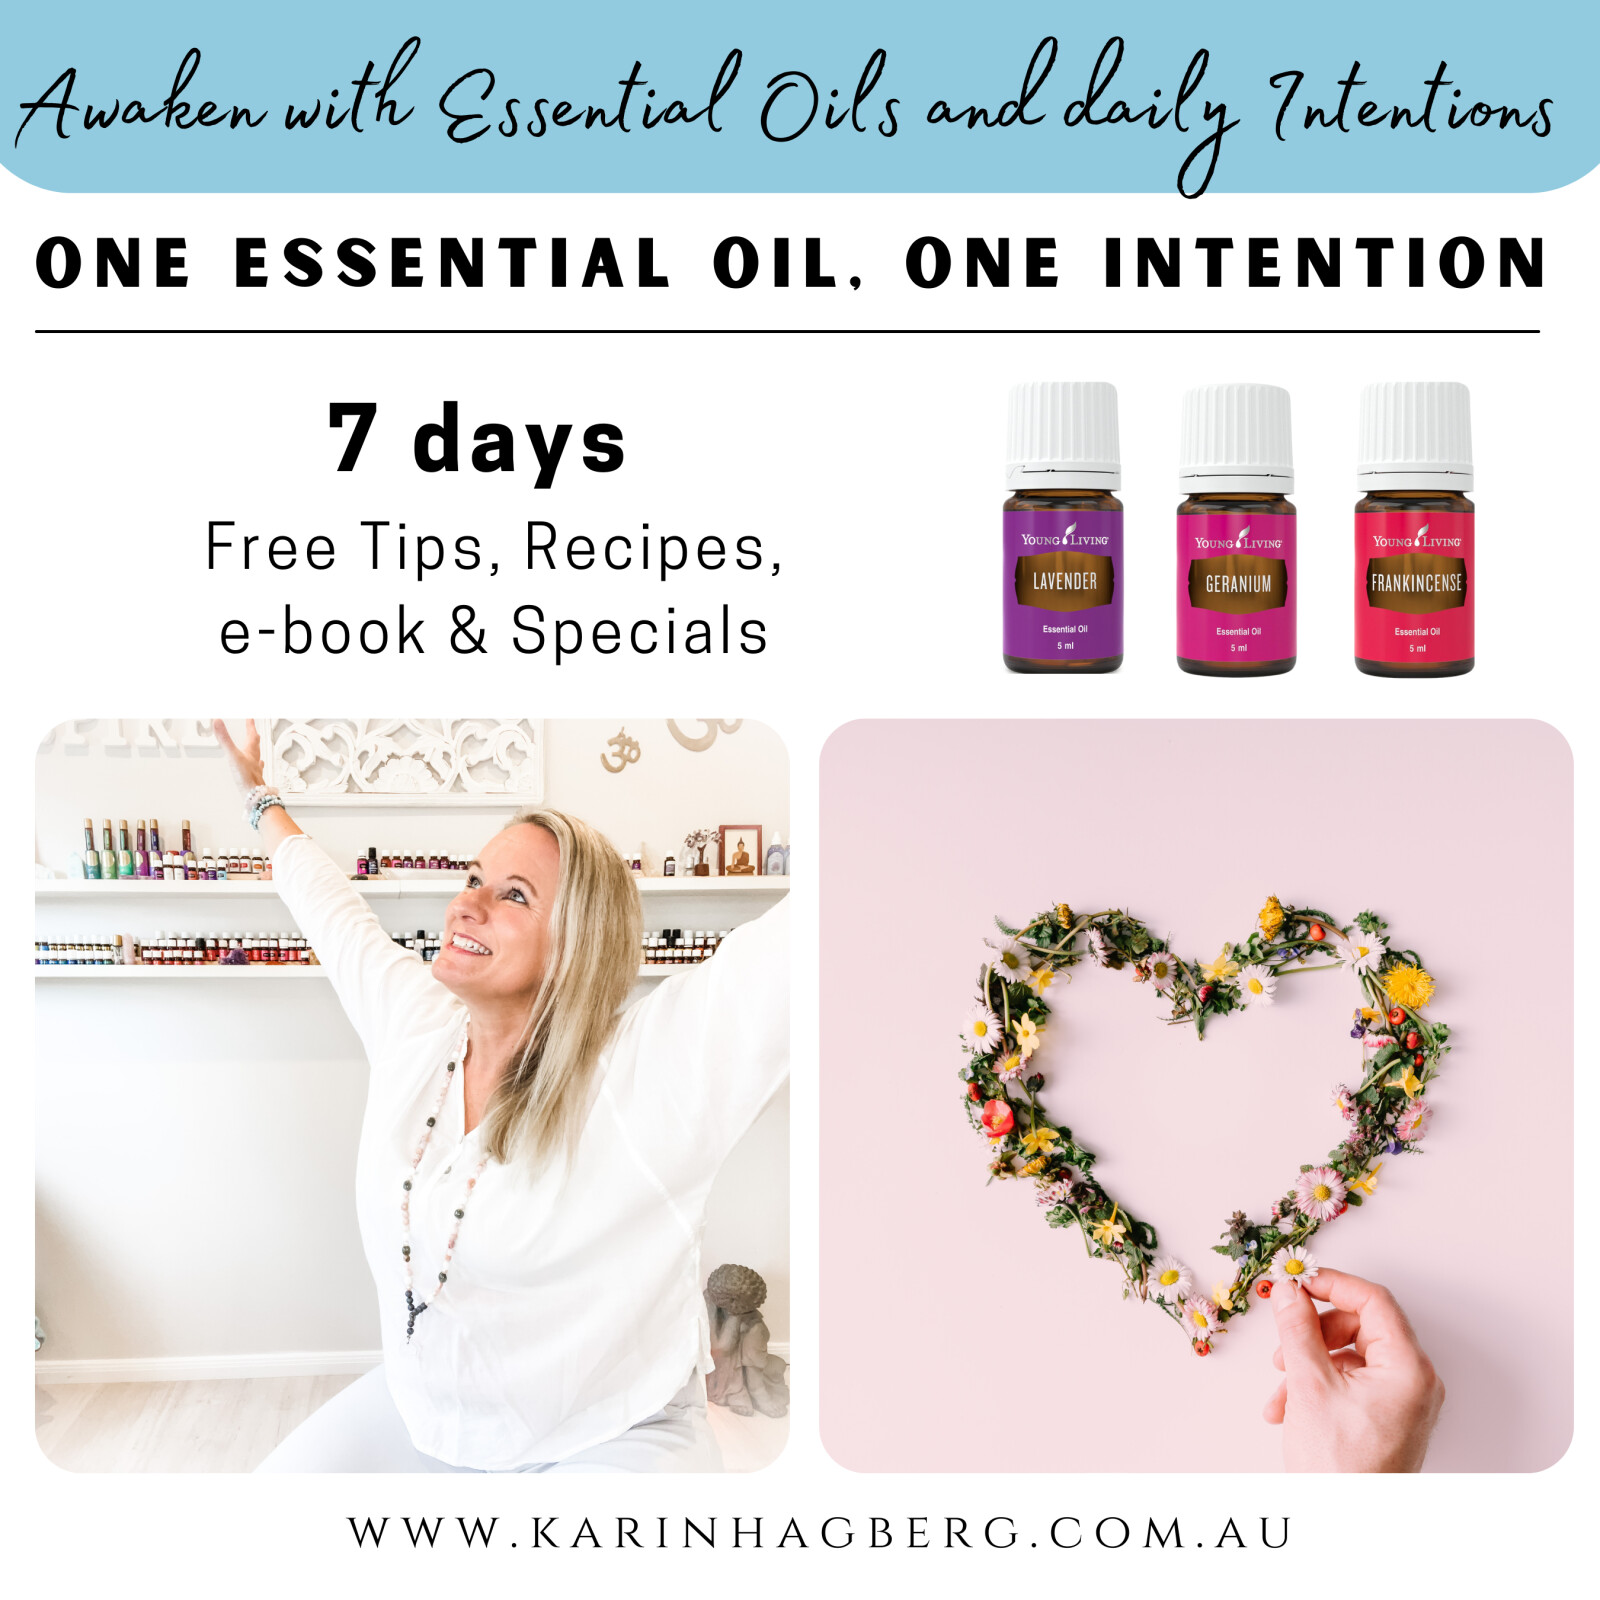 Awaken with Essential Oils and Daily Intentions